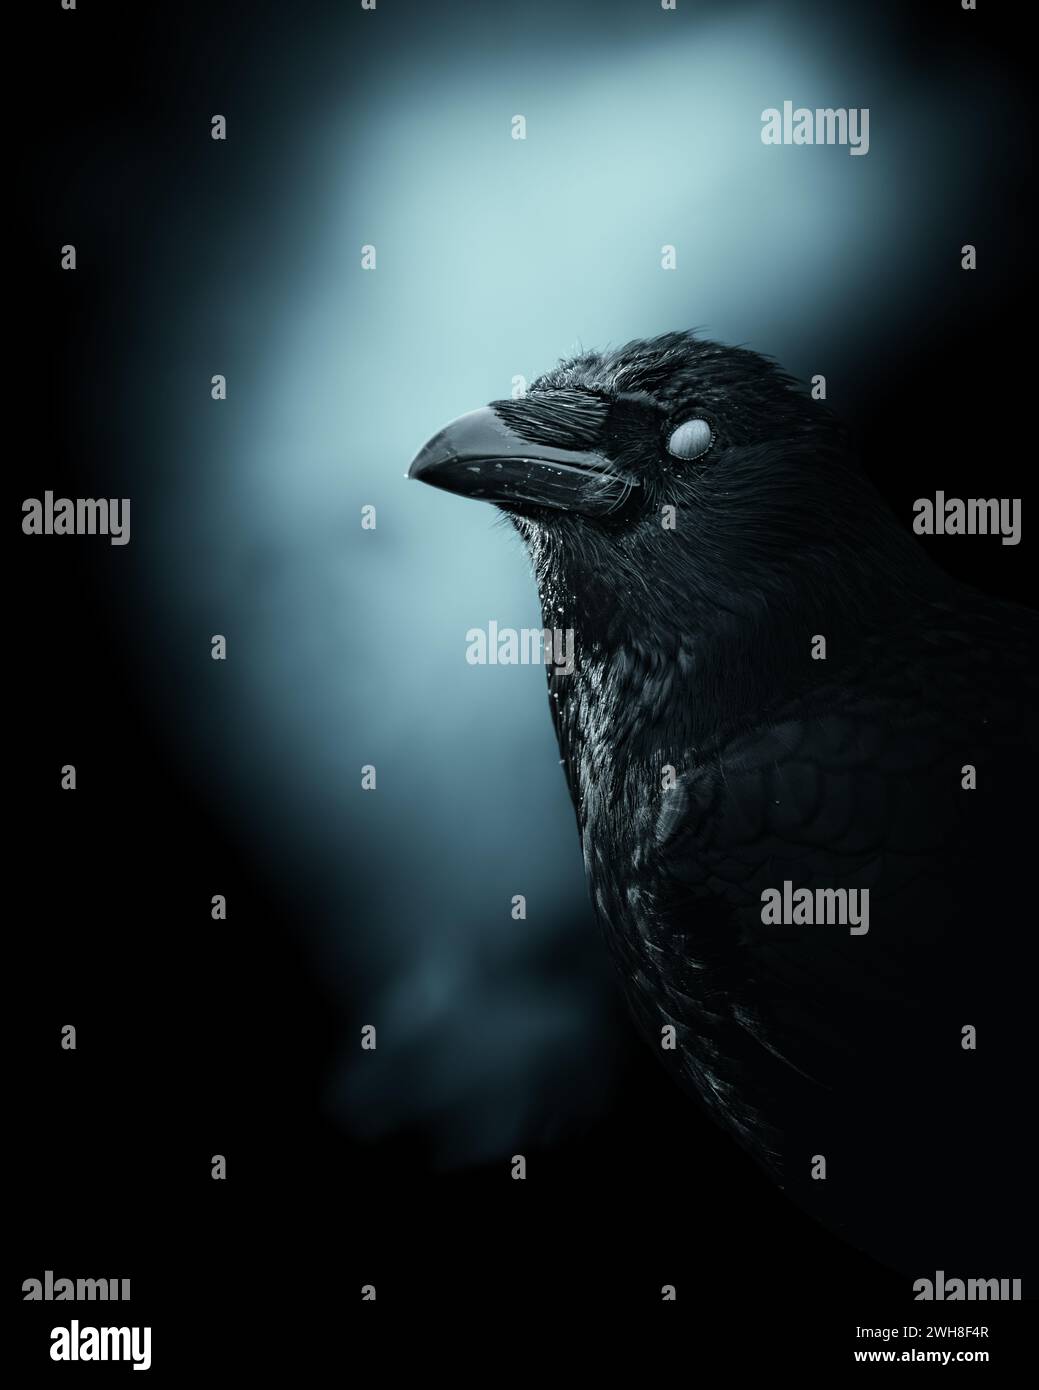 A raven illuminated by moonlight in a dimly lit room Stock Photo